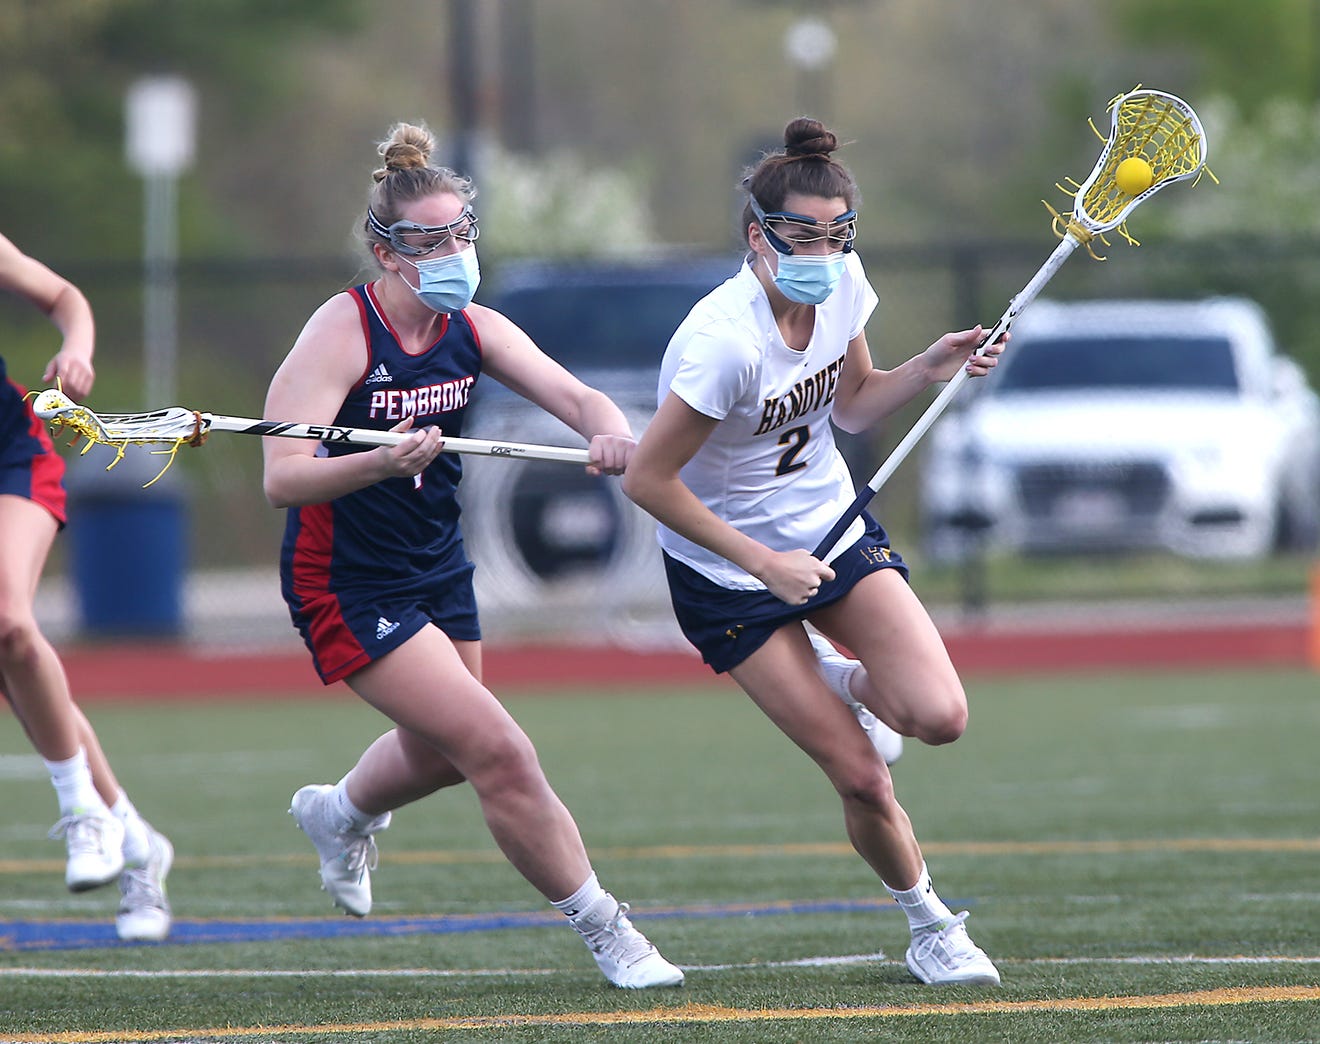 Vote for the High School Girls Lacrosse Player of the Week